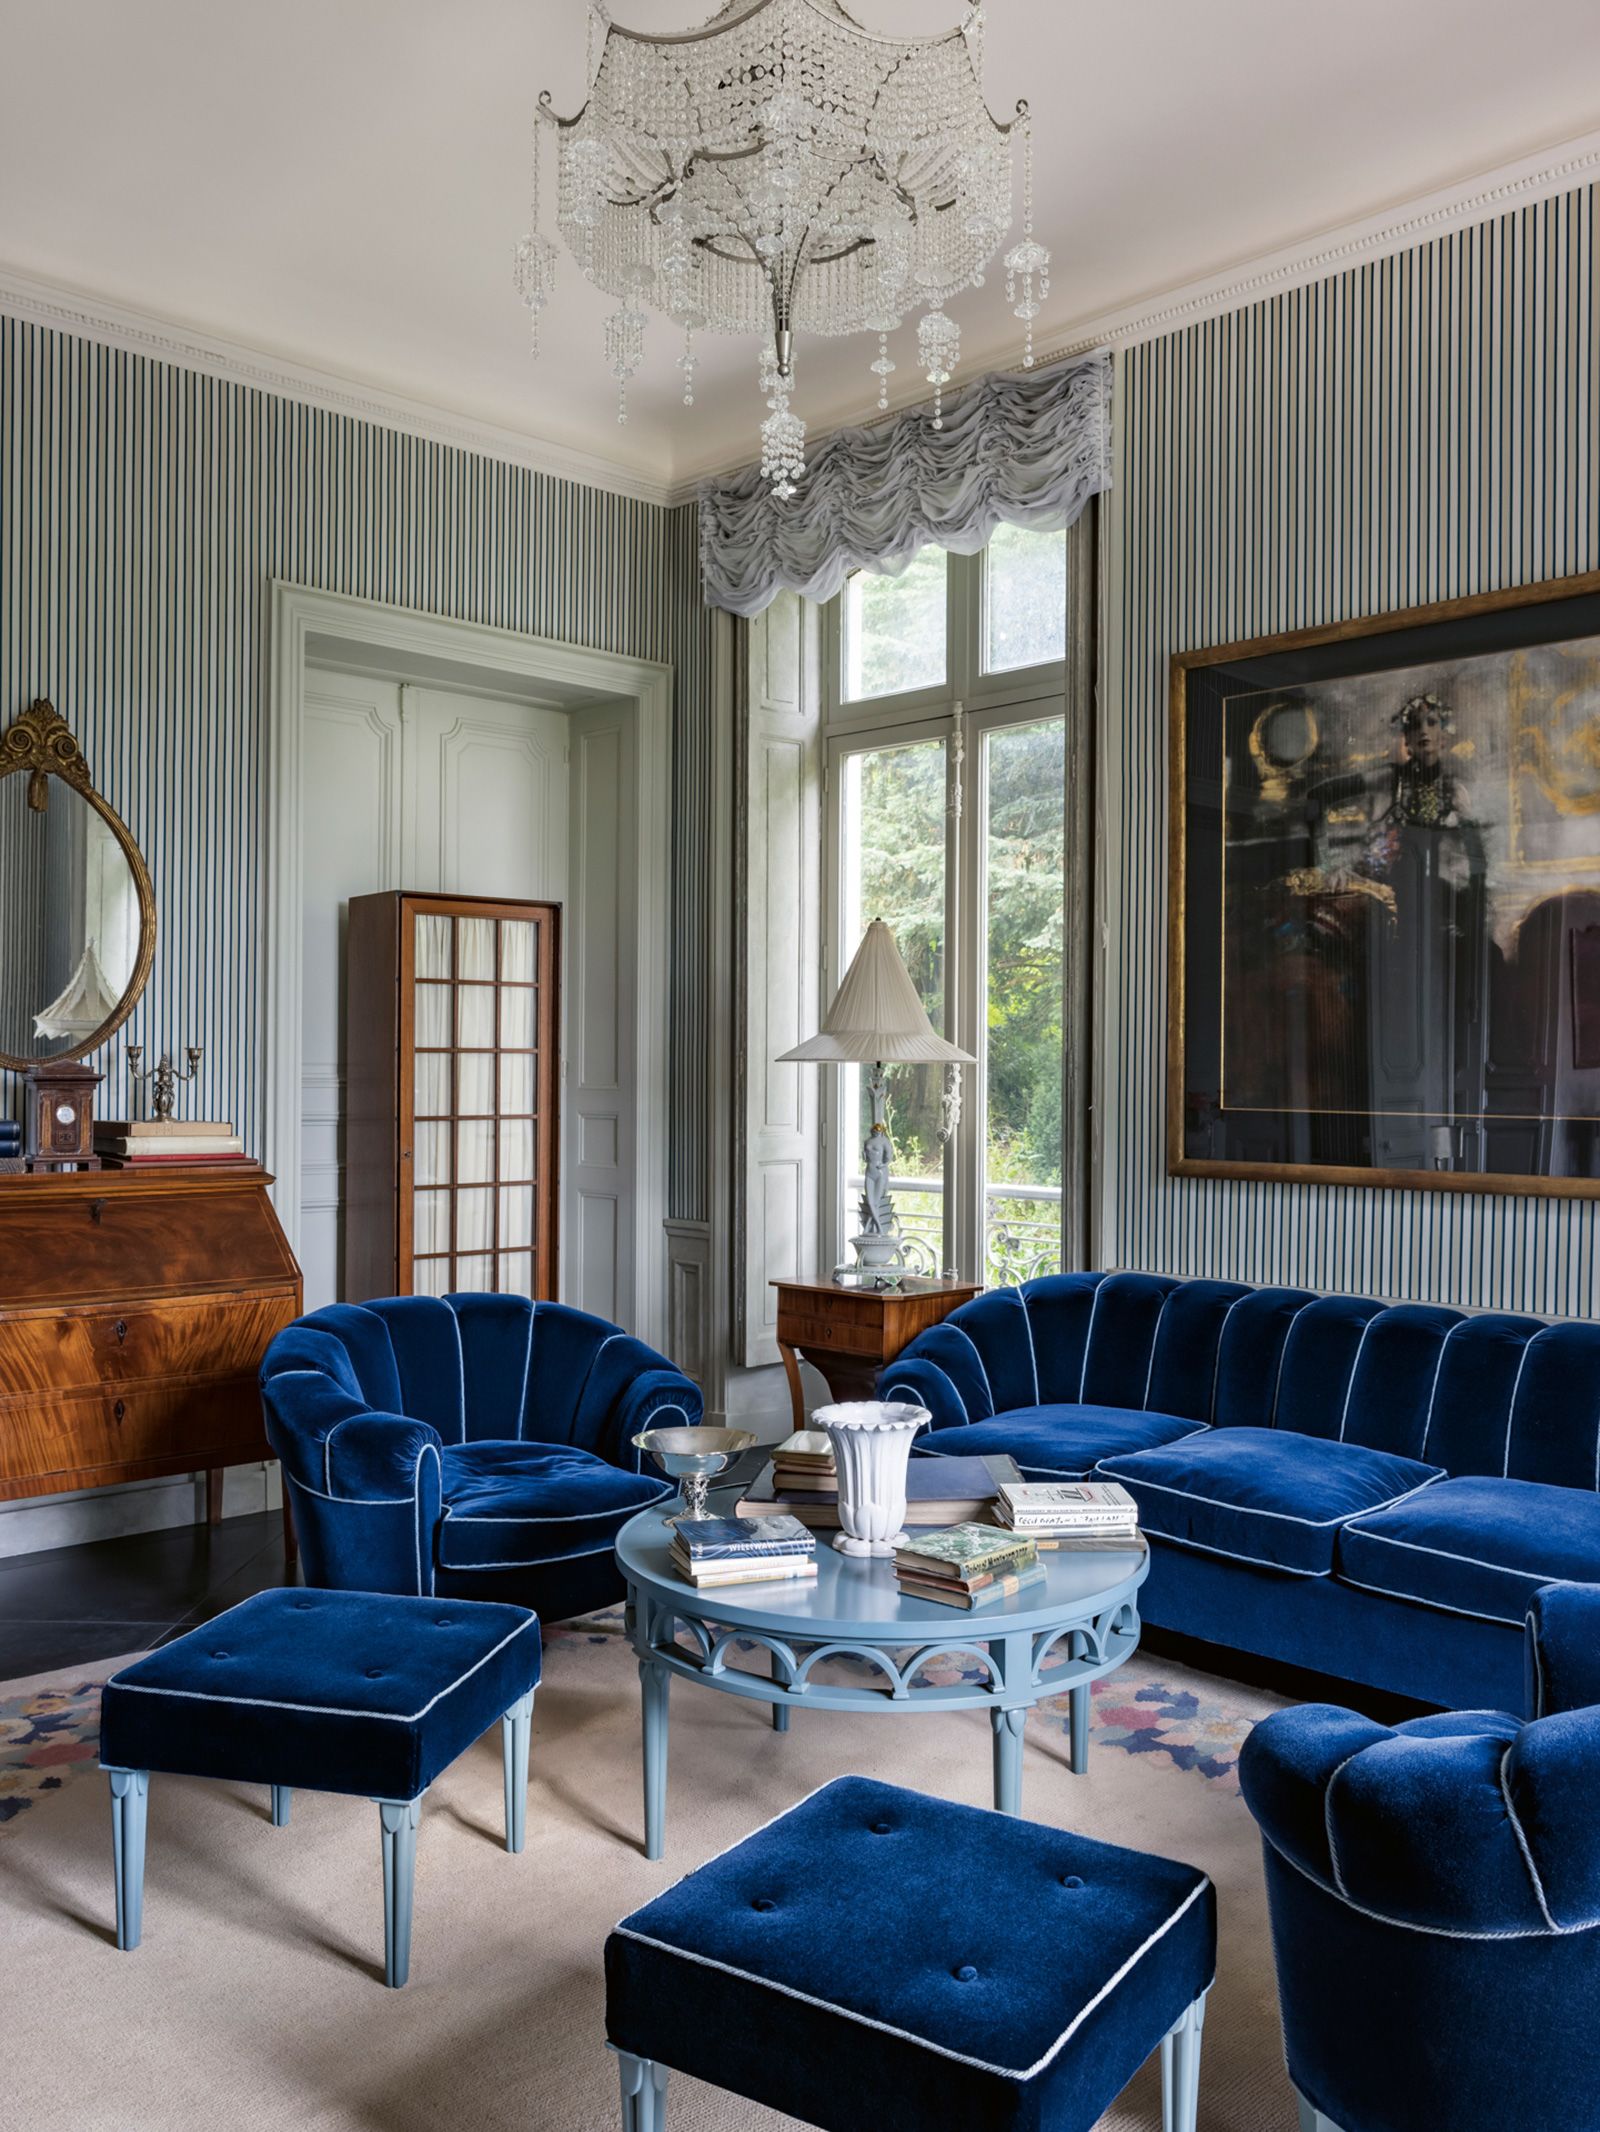 Throughout Villa Louveciennes, Lagerfeld took inspiration from his previous residences — what Kalt describes as "a compendium of his previous passions." Pictured above, a living space outfitted in lush blue velvets.